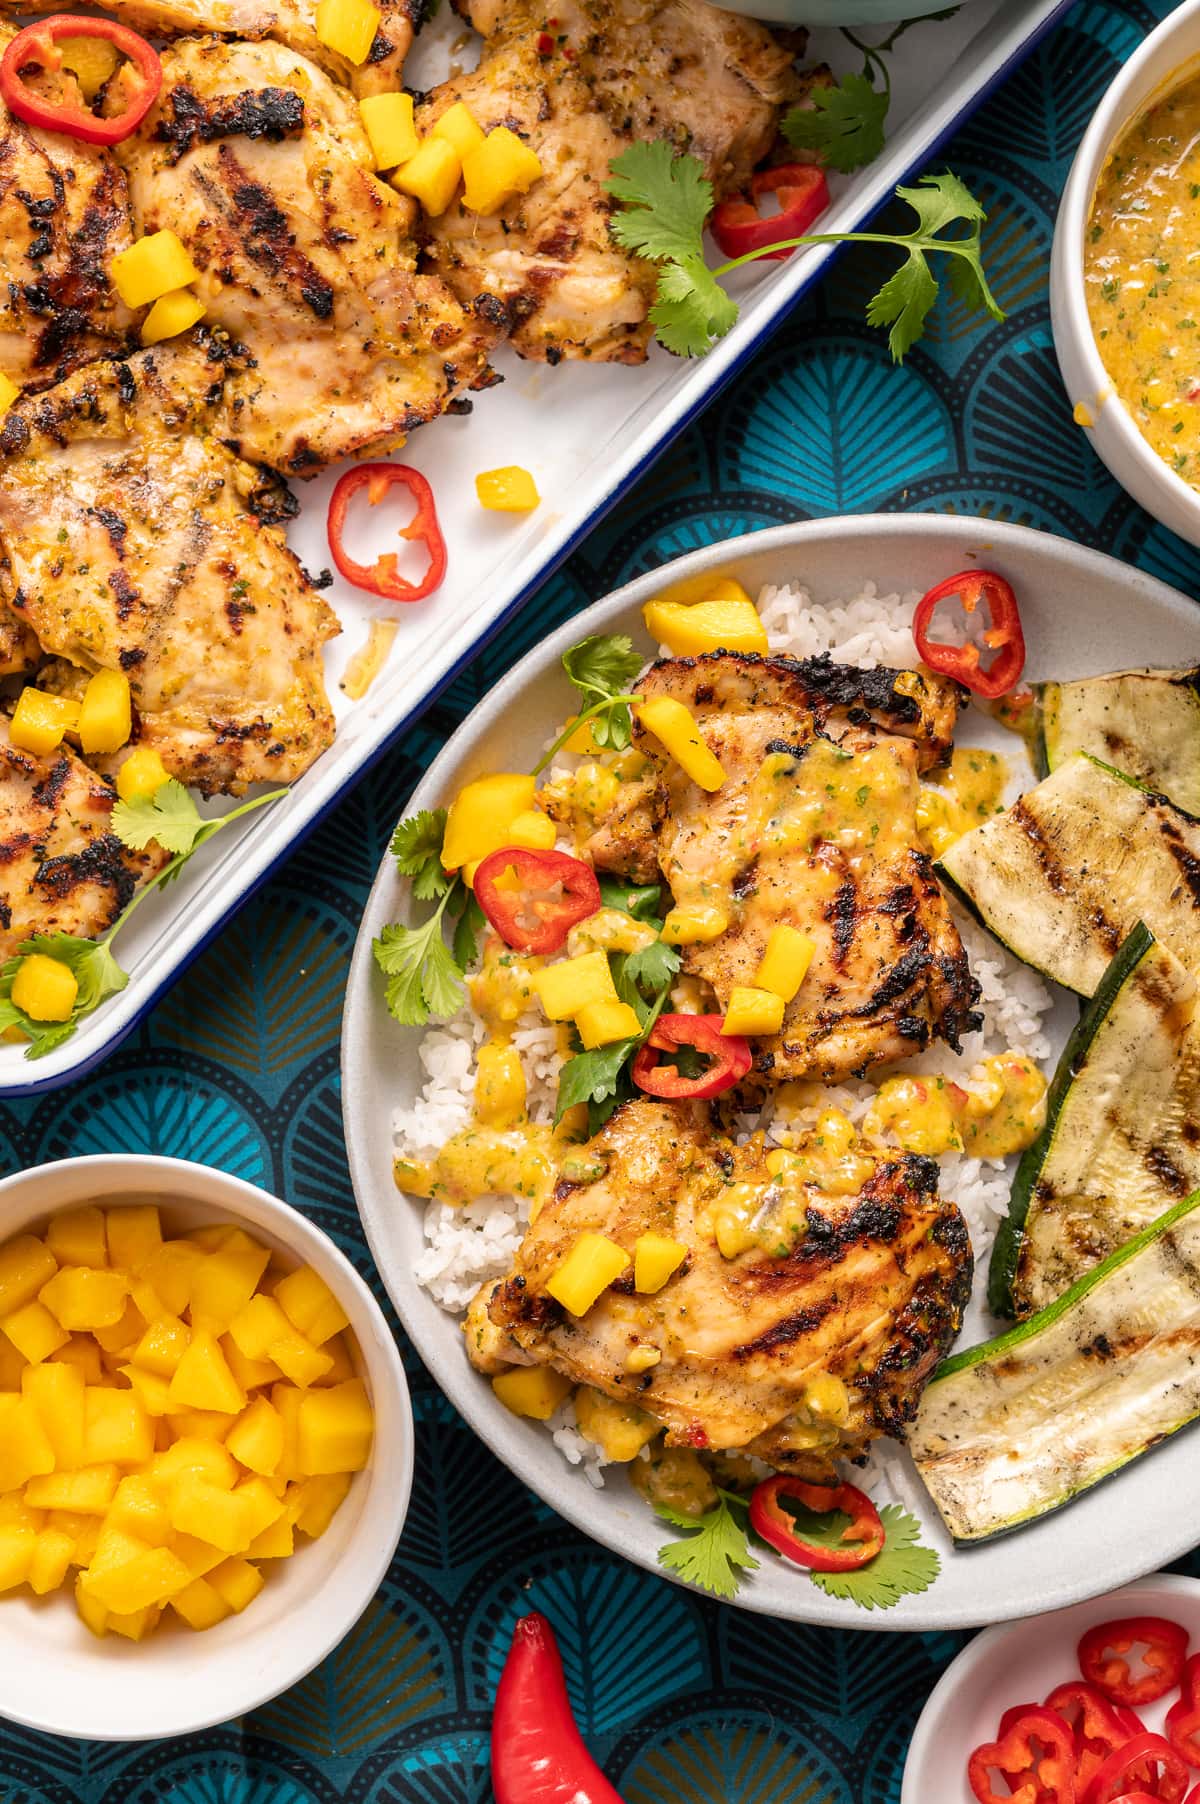 grilled chicken on a plate with mango and red chili slices cilanto pieces bowl of white rice bowl of yellow mango sauce grilled zucchini slices